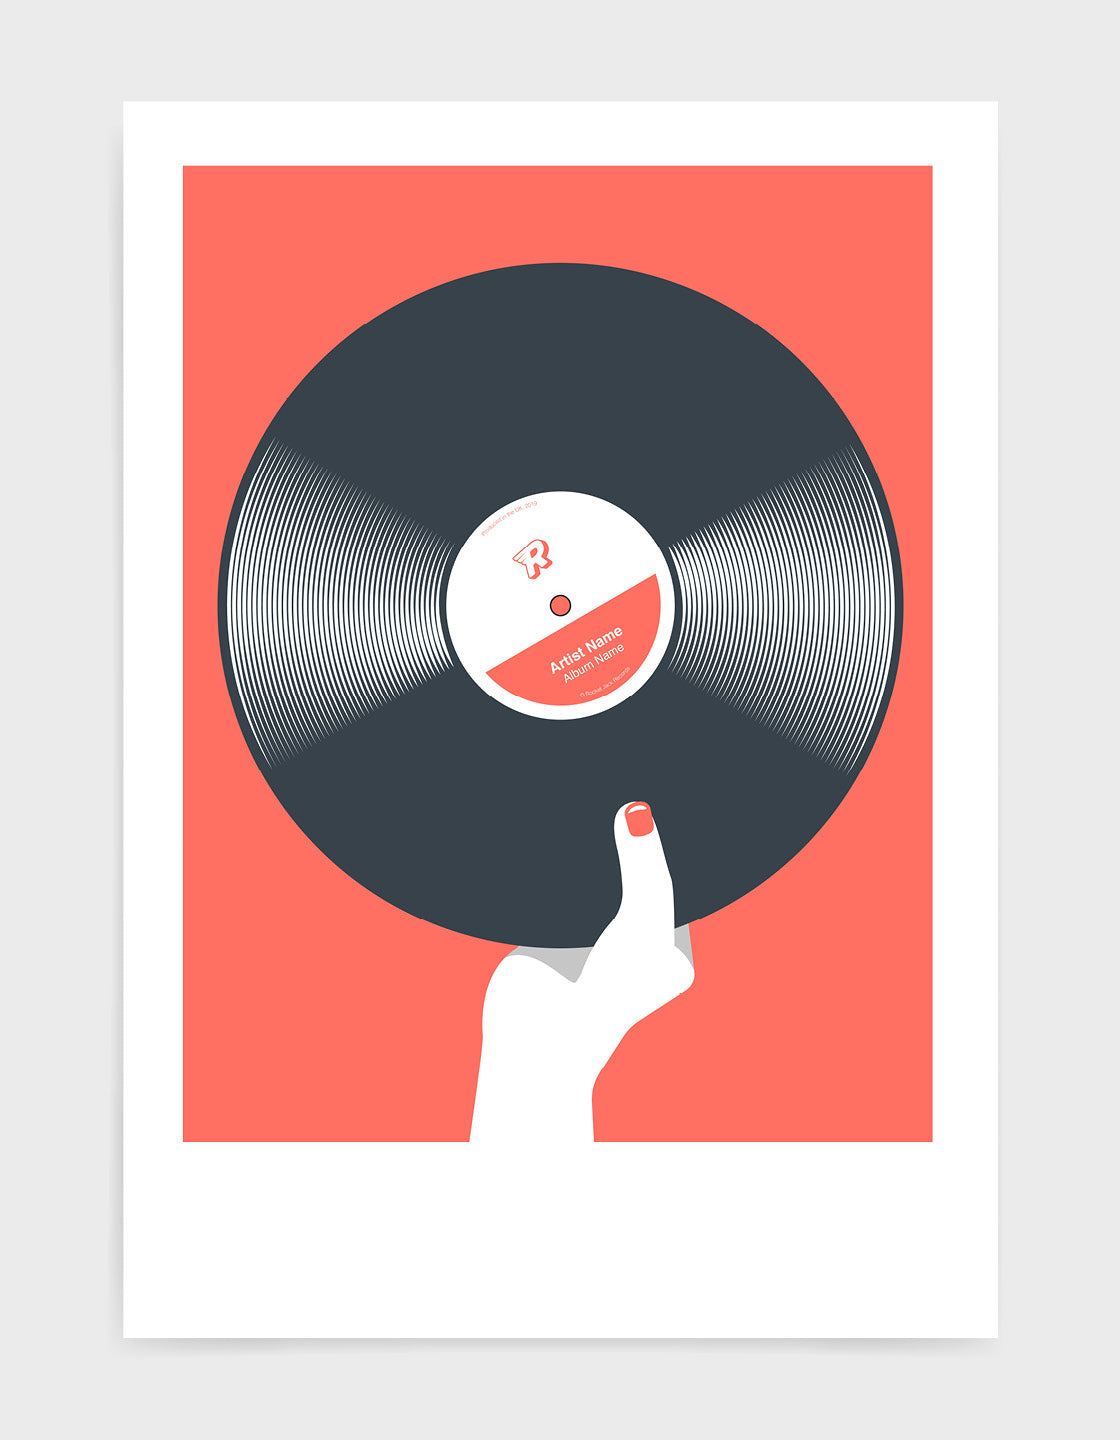  art print image of a black vinyl record held in a hand with red nails against a living coral background